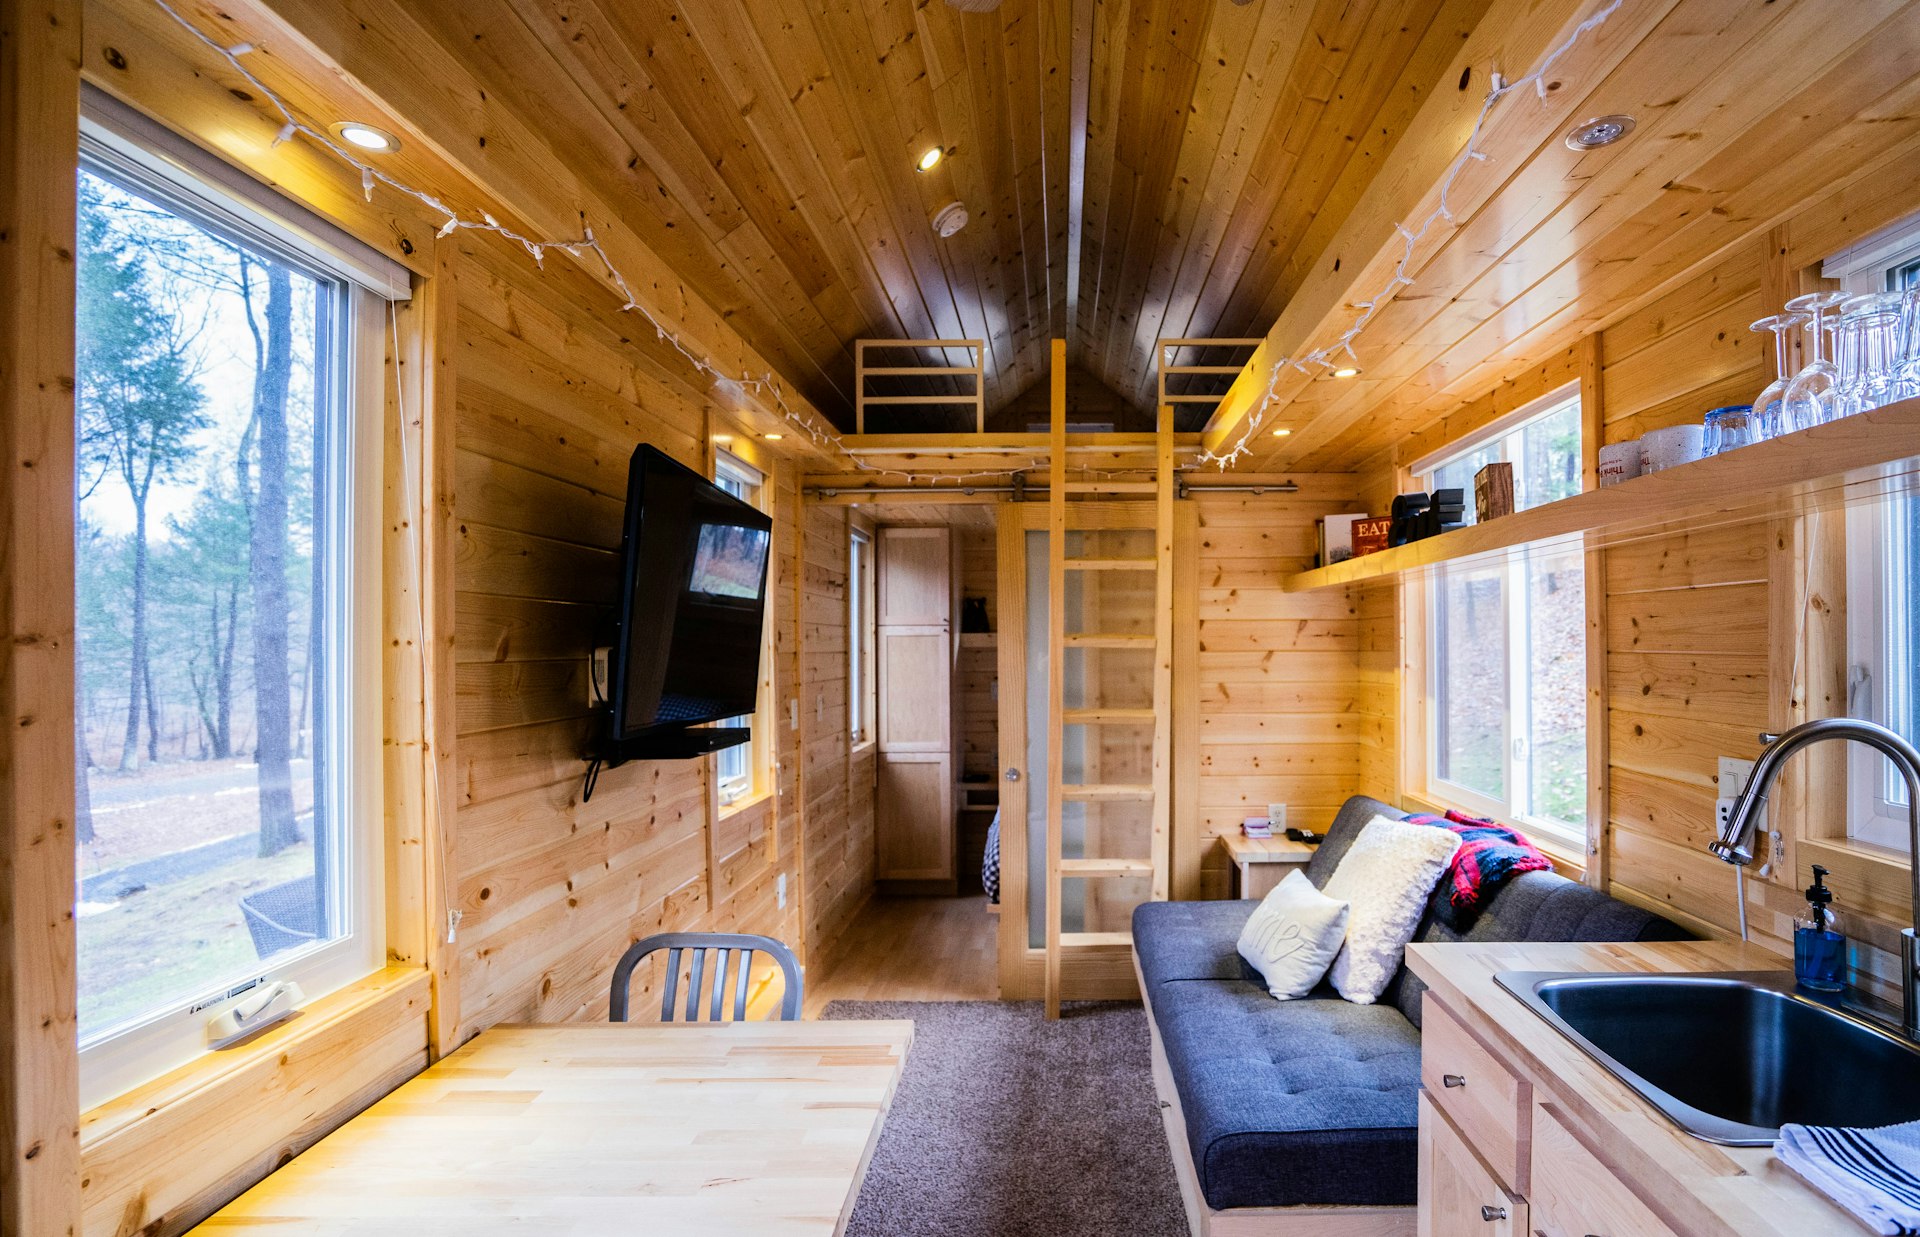 The interior of a narrow wooden cabin, with a kitchen sink, dining table, seating area and wooden ladder leading up to a loft bunk space.